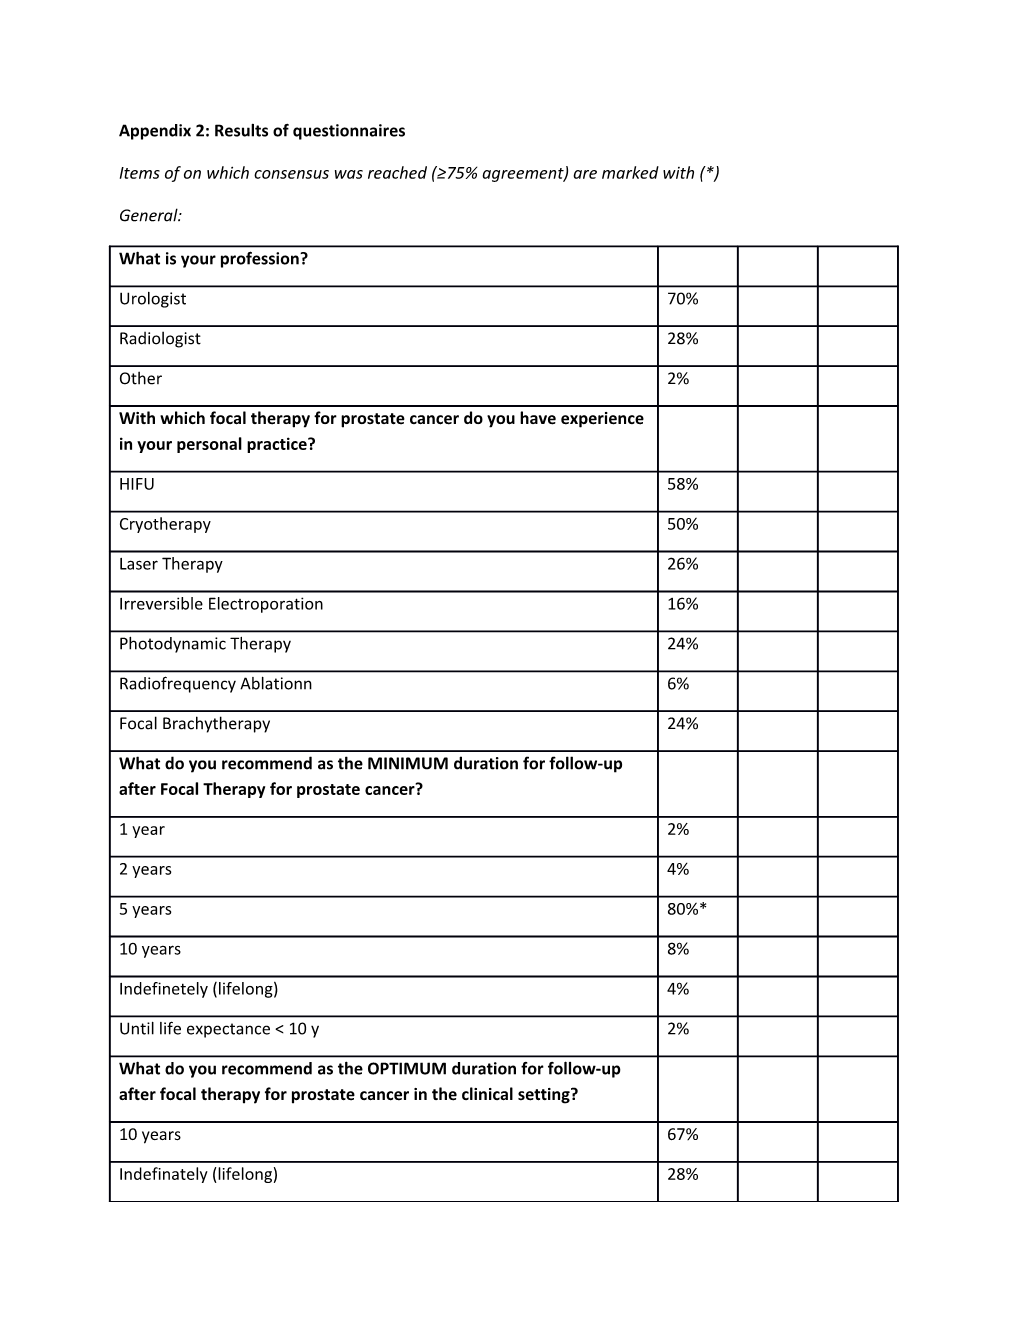 Appendix 2: Results of Questionnaires